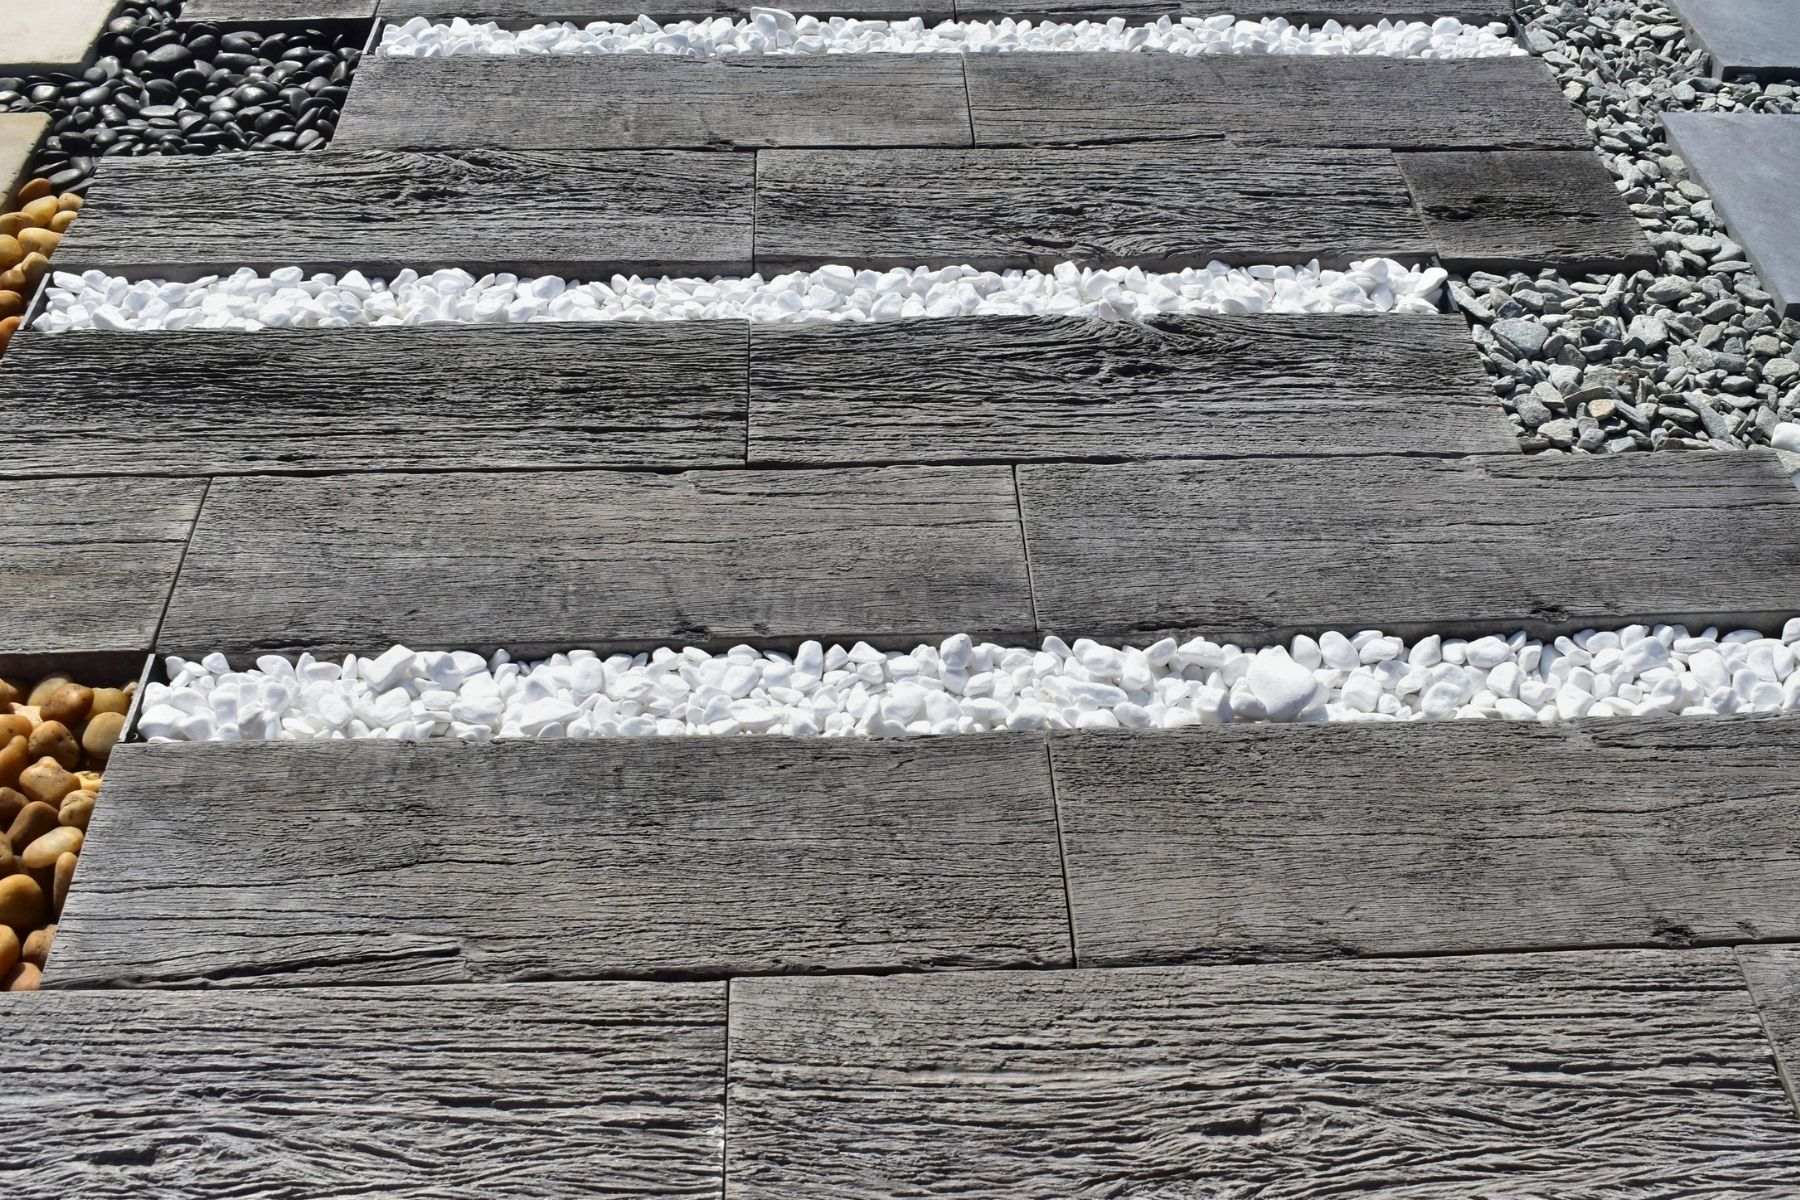 timber look pavers with a weathered antique look contrasting white stones in between